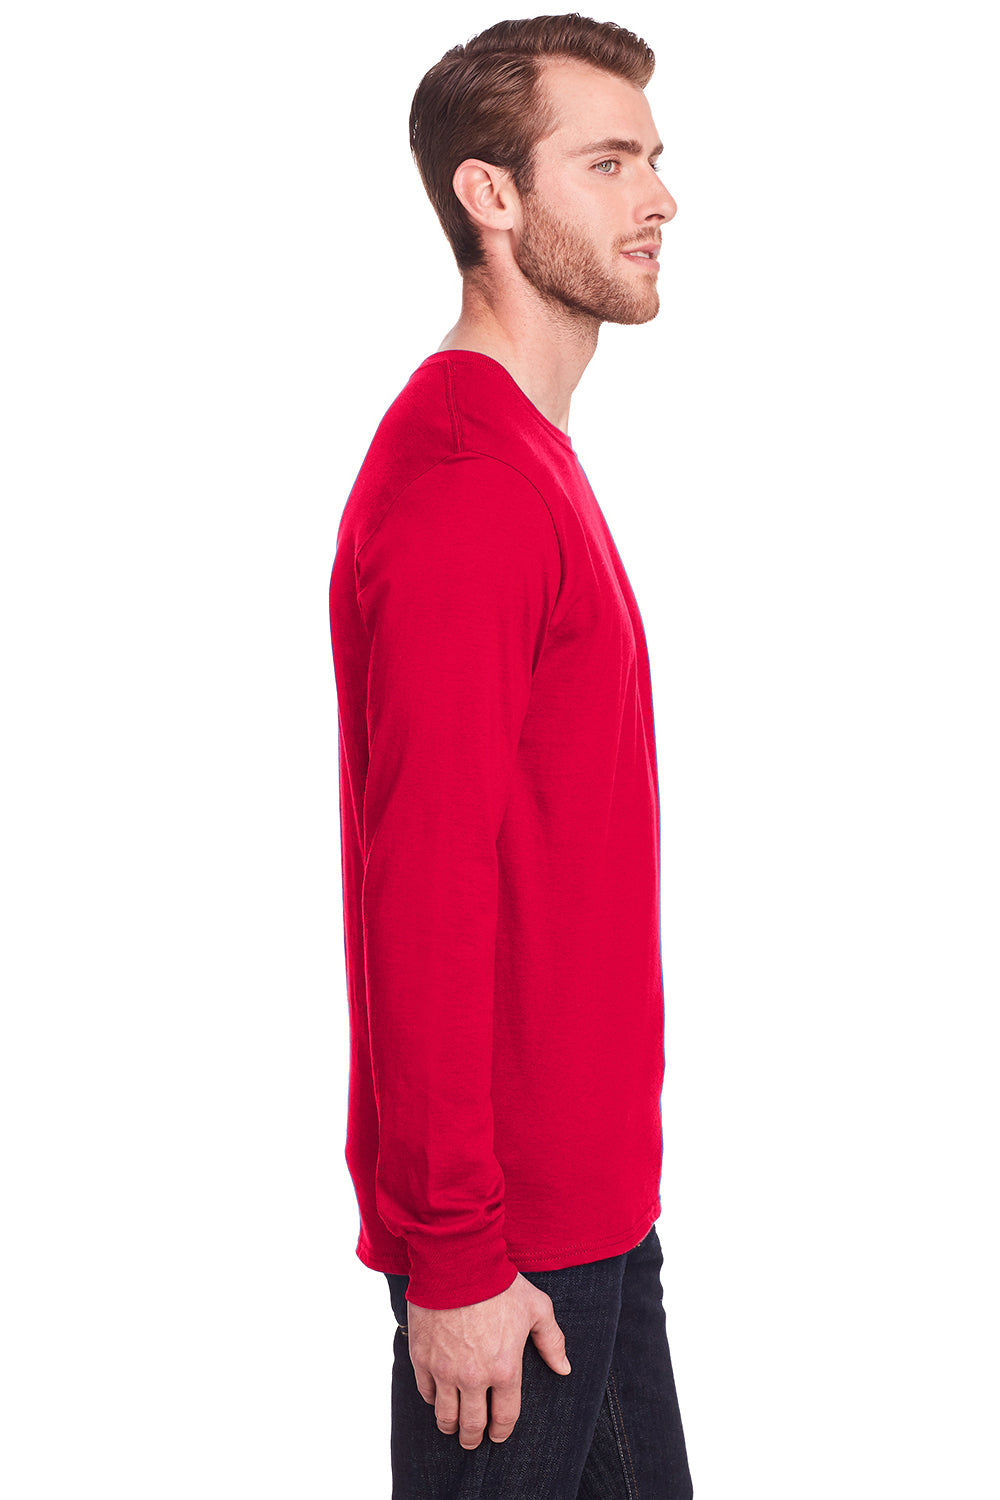 Fruit Of The Loom IC47LSR Mens Iconic Long Sleeve Crewneck T-Shirt Red Side